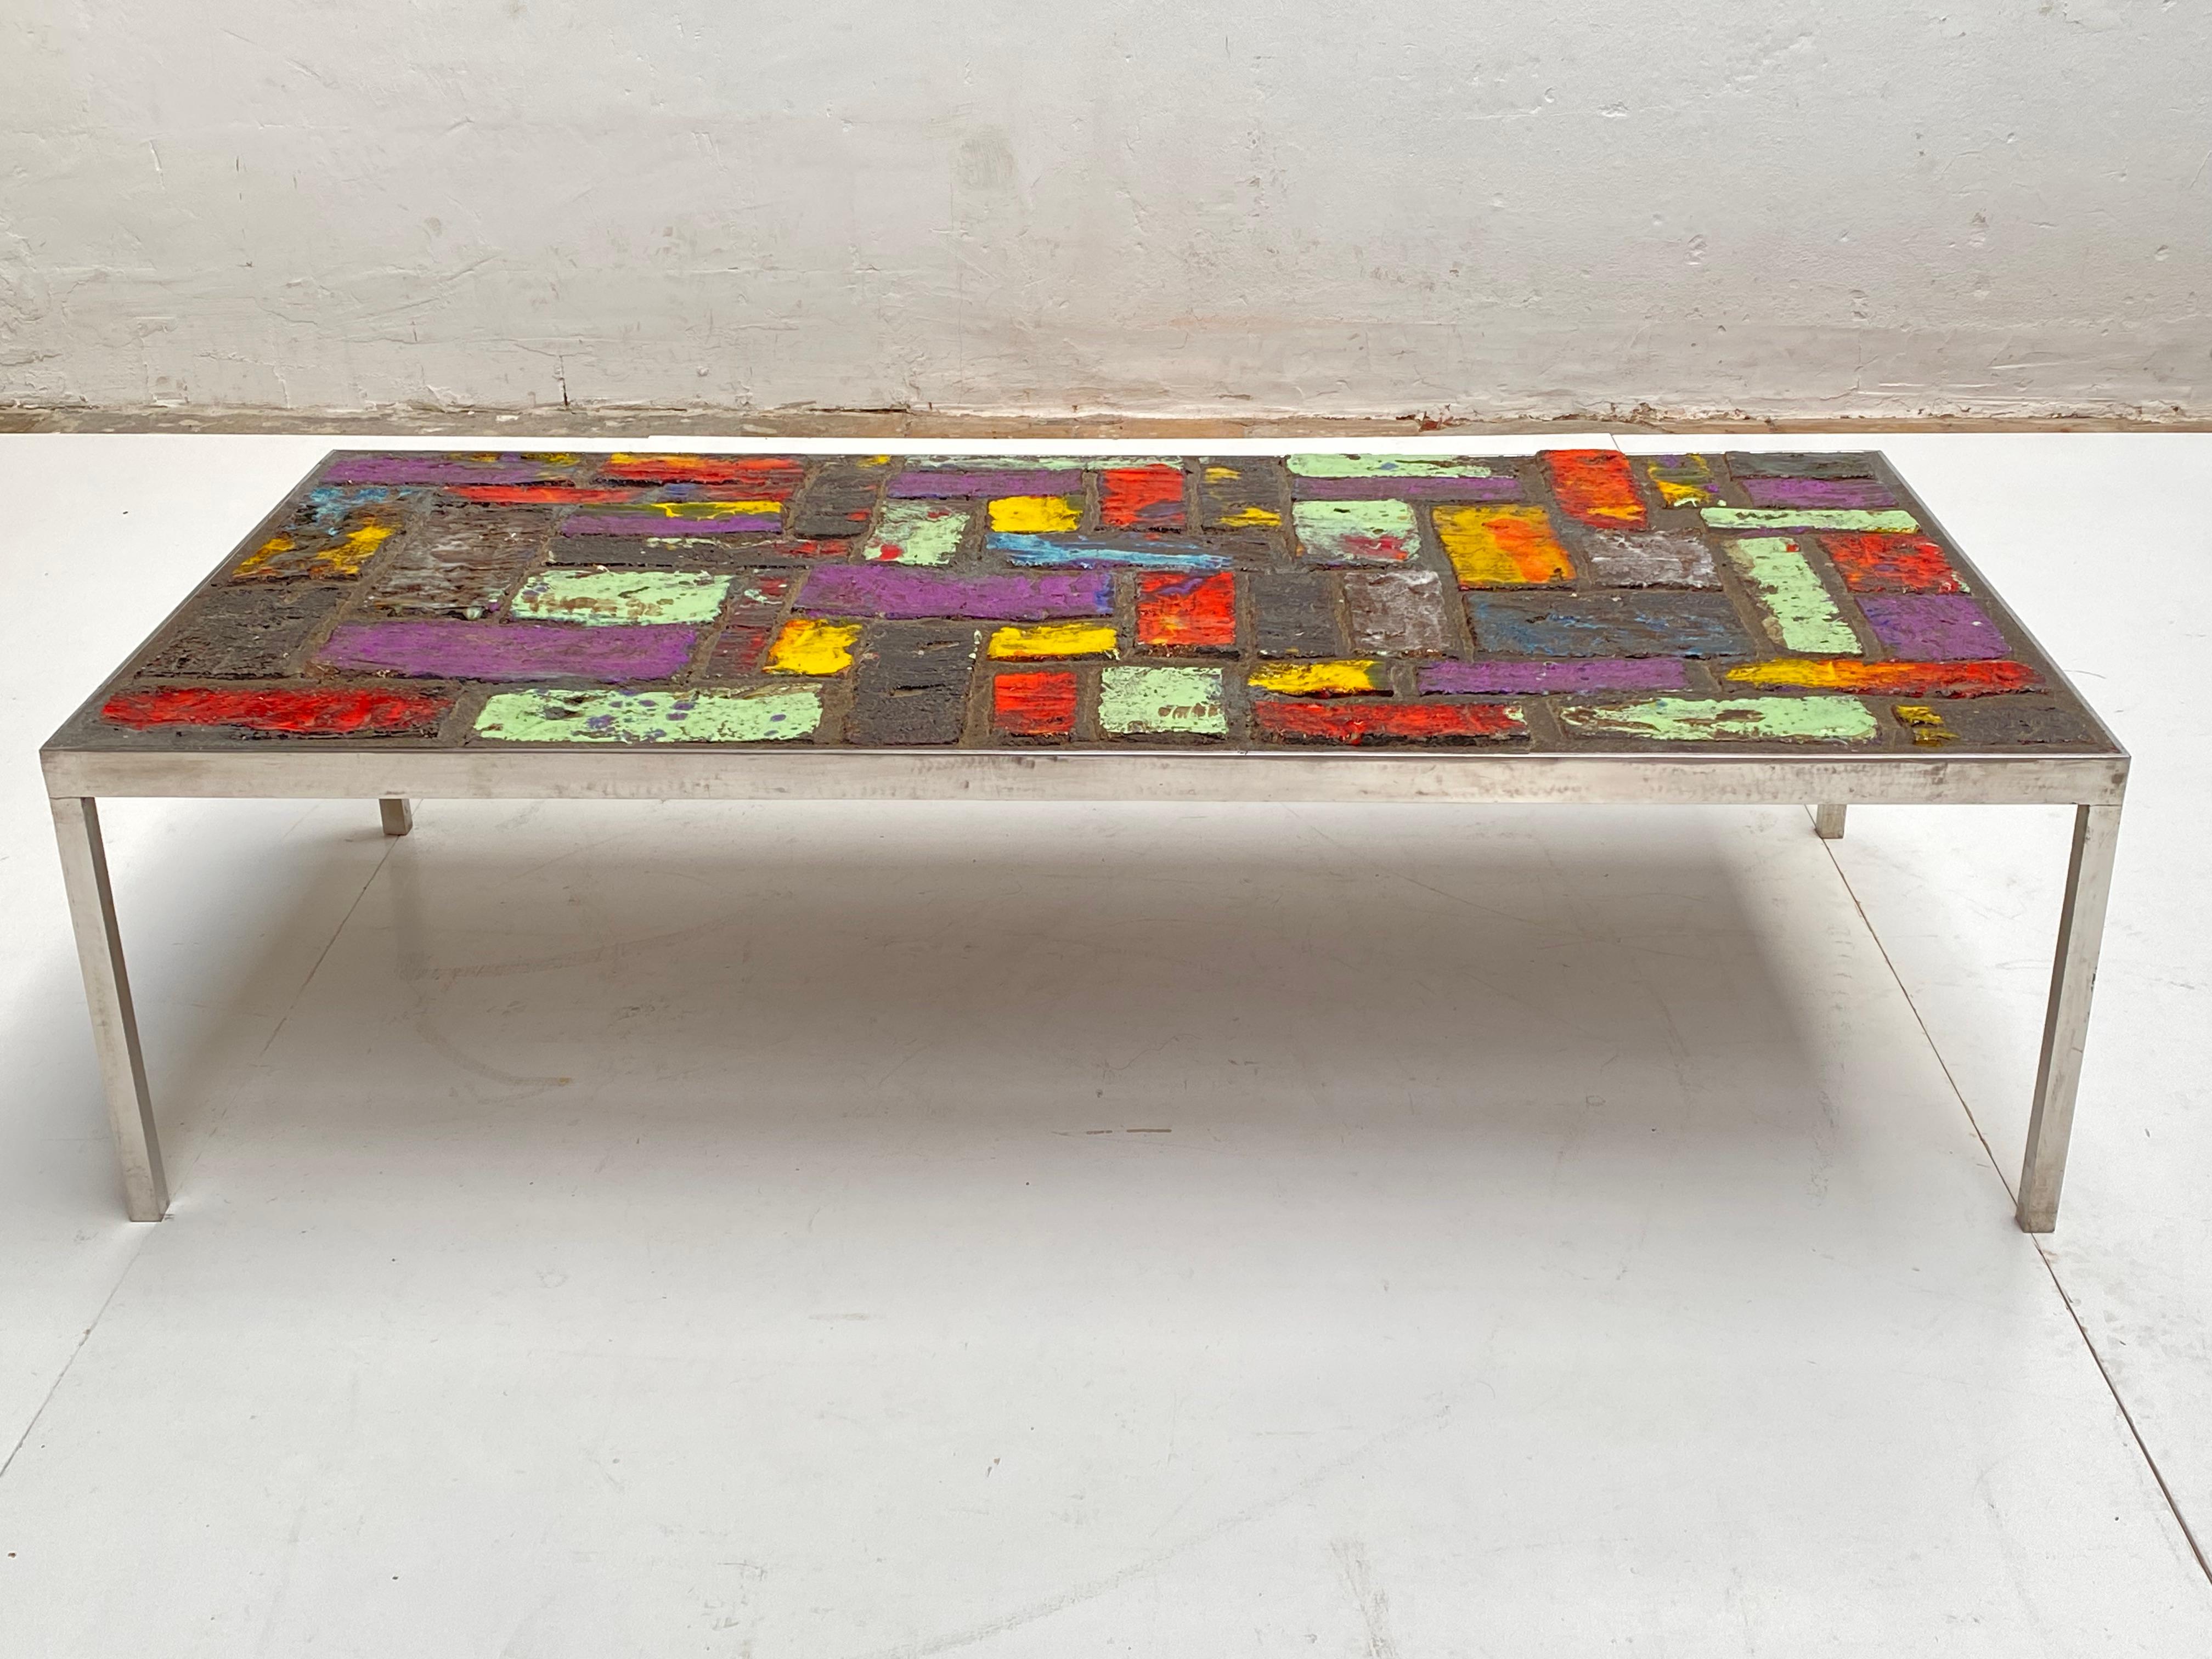 Very bright and colourful Brutalist coffee table by Pia Manu 

Solid chromed steel frame with ceramic top that looks like an abstract painting

The table is not signed or marked but the quality of this work only points to the famous Pia Manu